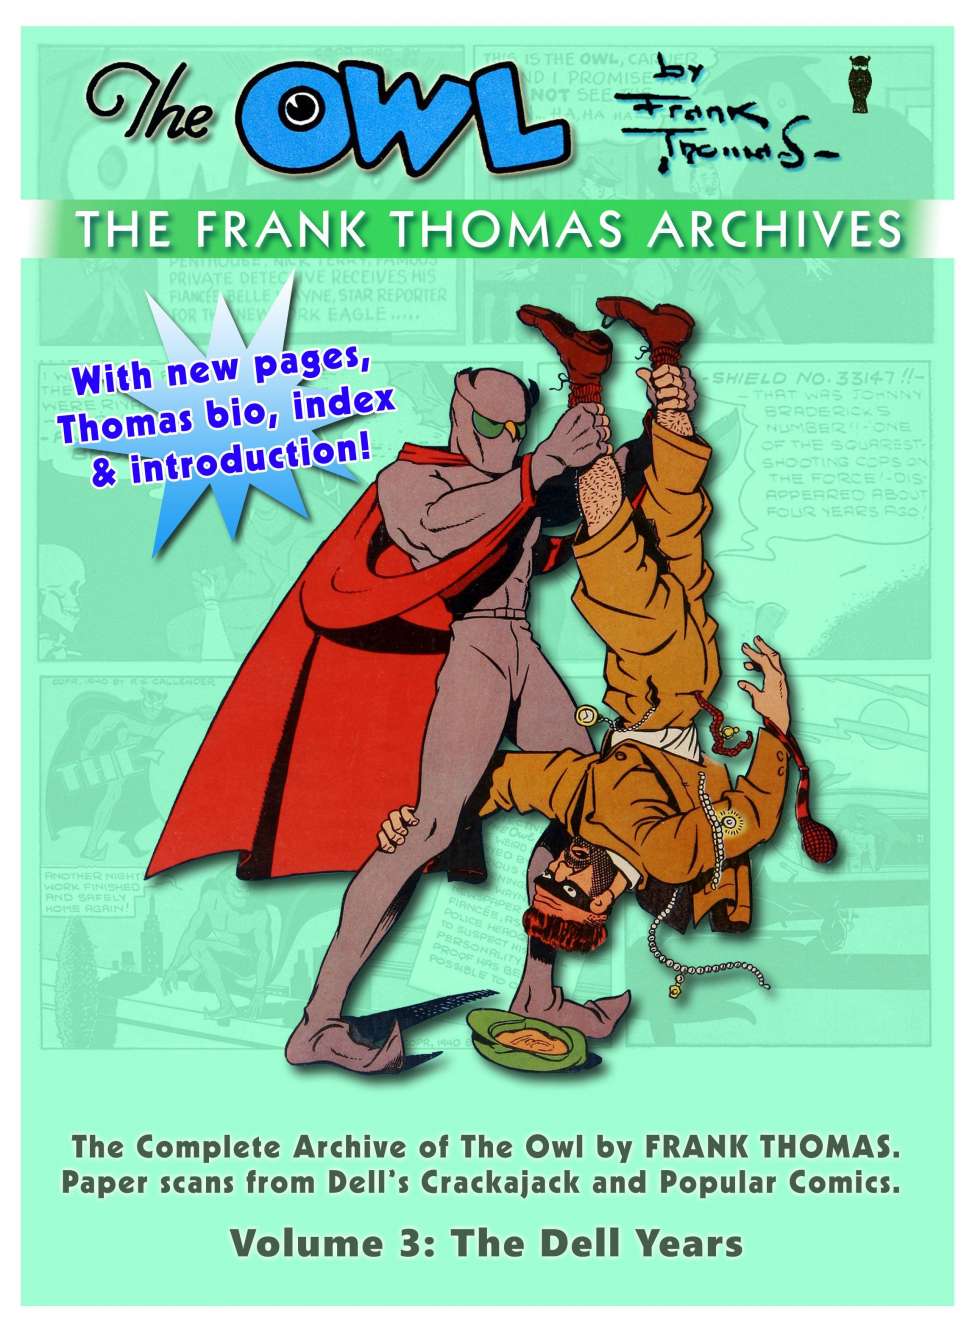 Book Cover For Frank Thomas Archives v3 - The Complete Owl Pt.1 (Dell)